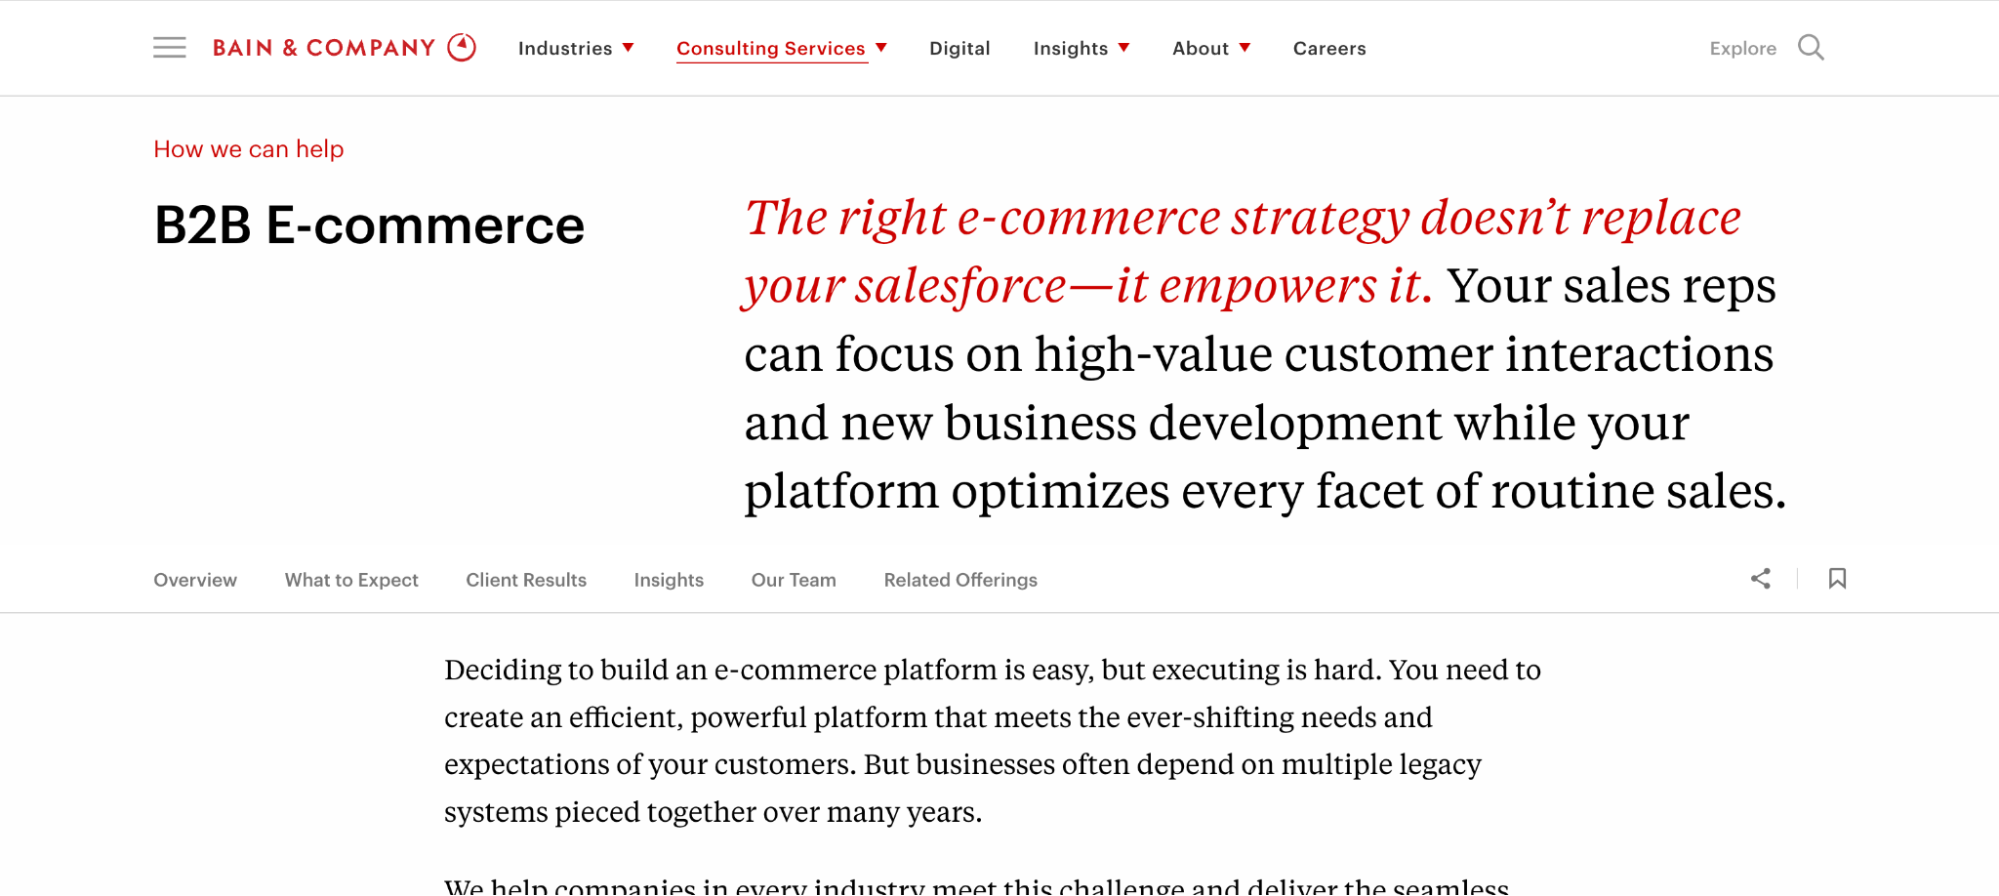 Bain & Company’s B2B ecommerce consulting page with information for future clients.